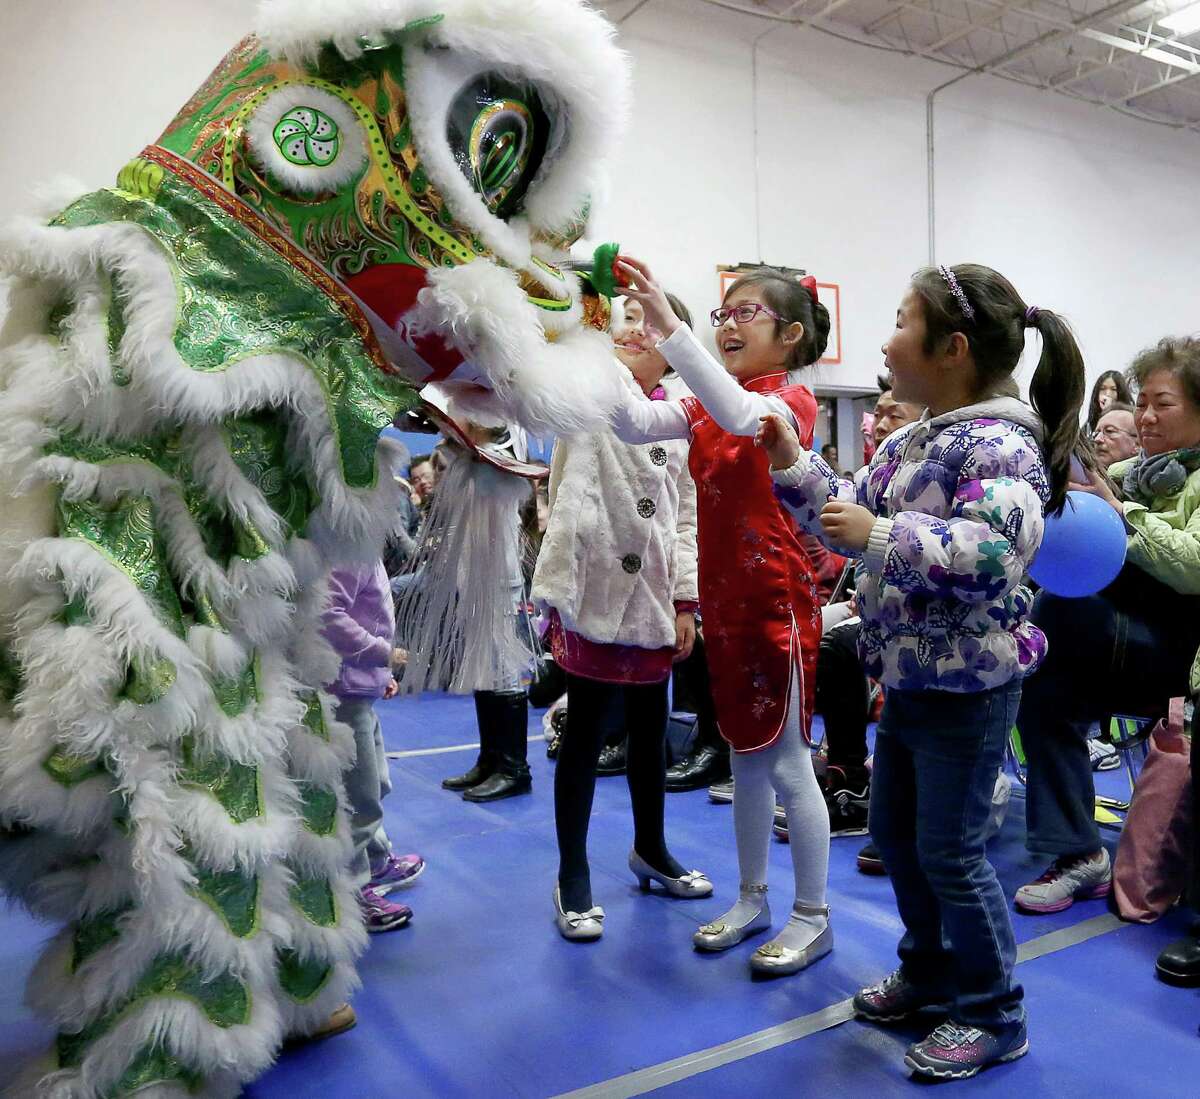 Children pet a lion during a lion dance at the Lunar New Year Festival at the Chinese Community Center Saturday, Feb. 6, 2016, in Houston. ( Jon Shapley / Houston Chronicle )